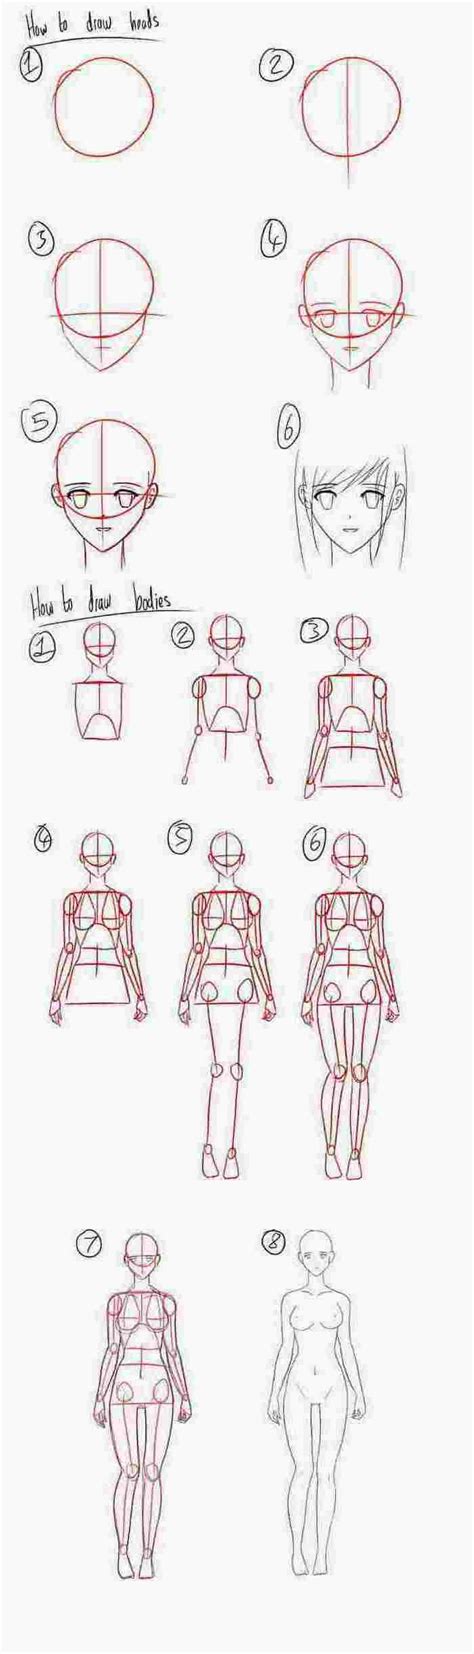 How To Draw Anime Step By Step Tutorials And Pictures